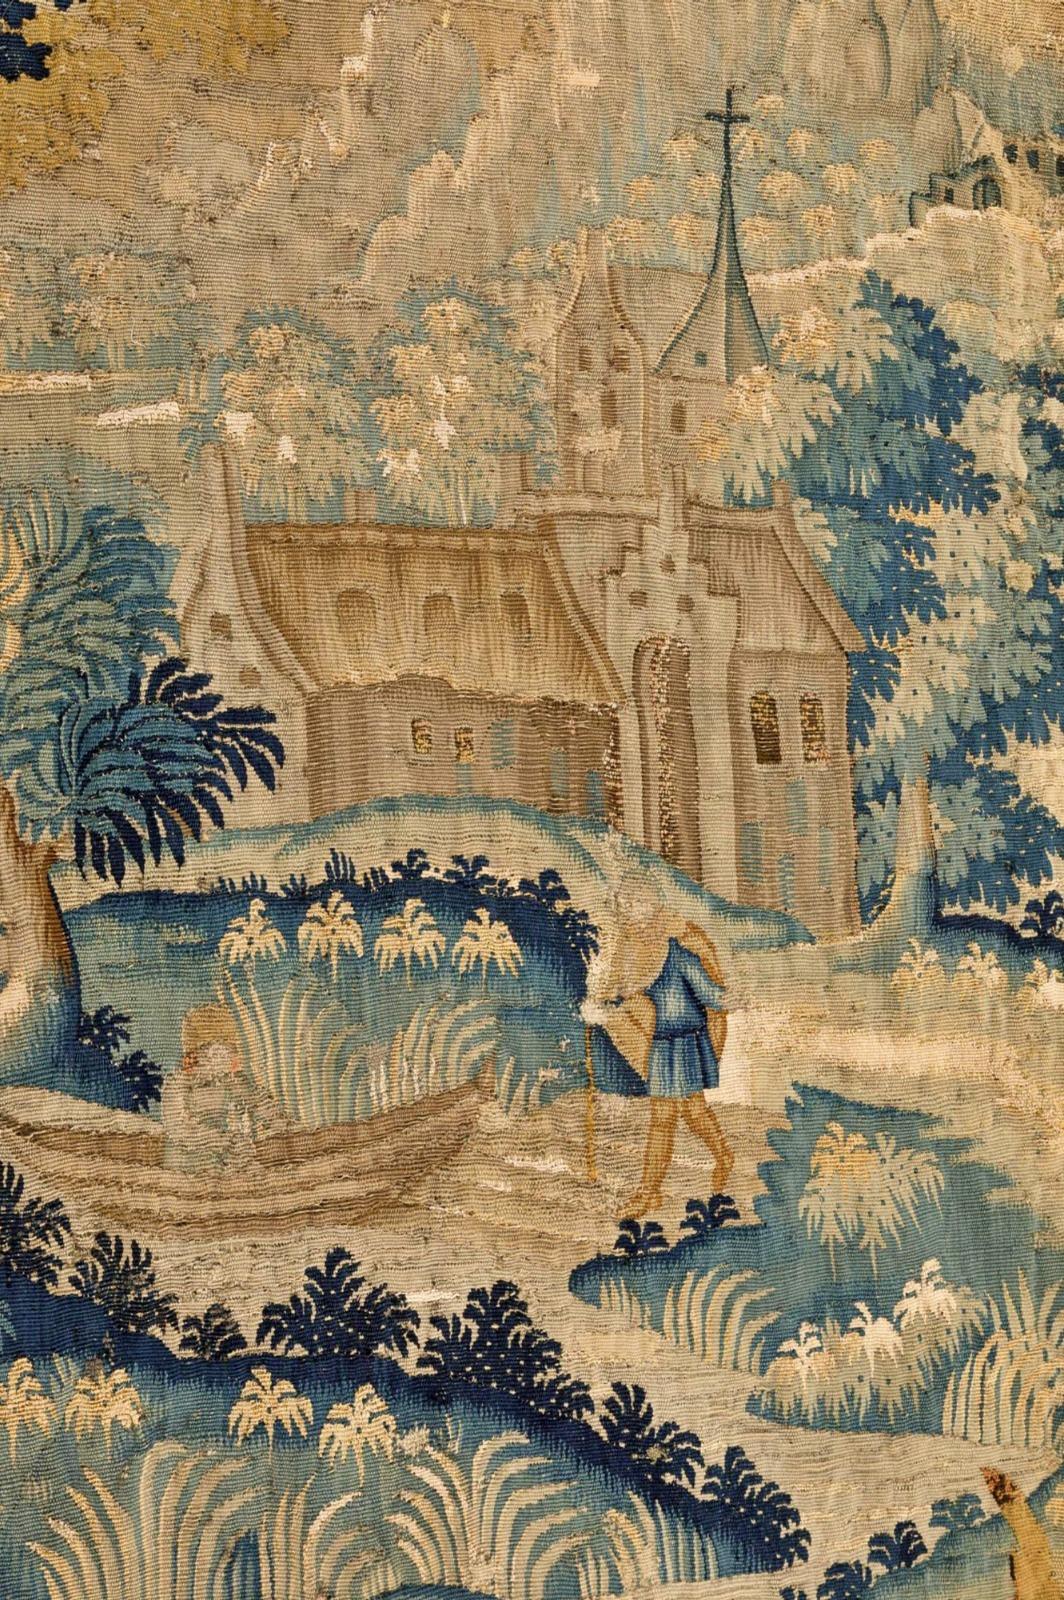 Beautiful Flemish Tapestry 17th century

Southern-Netherlandish wool and linen wall tapestry from the 17th century. 
Depiction of strollers in front of a castle. 
300 x 192 cm
Good condition.